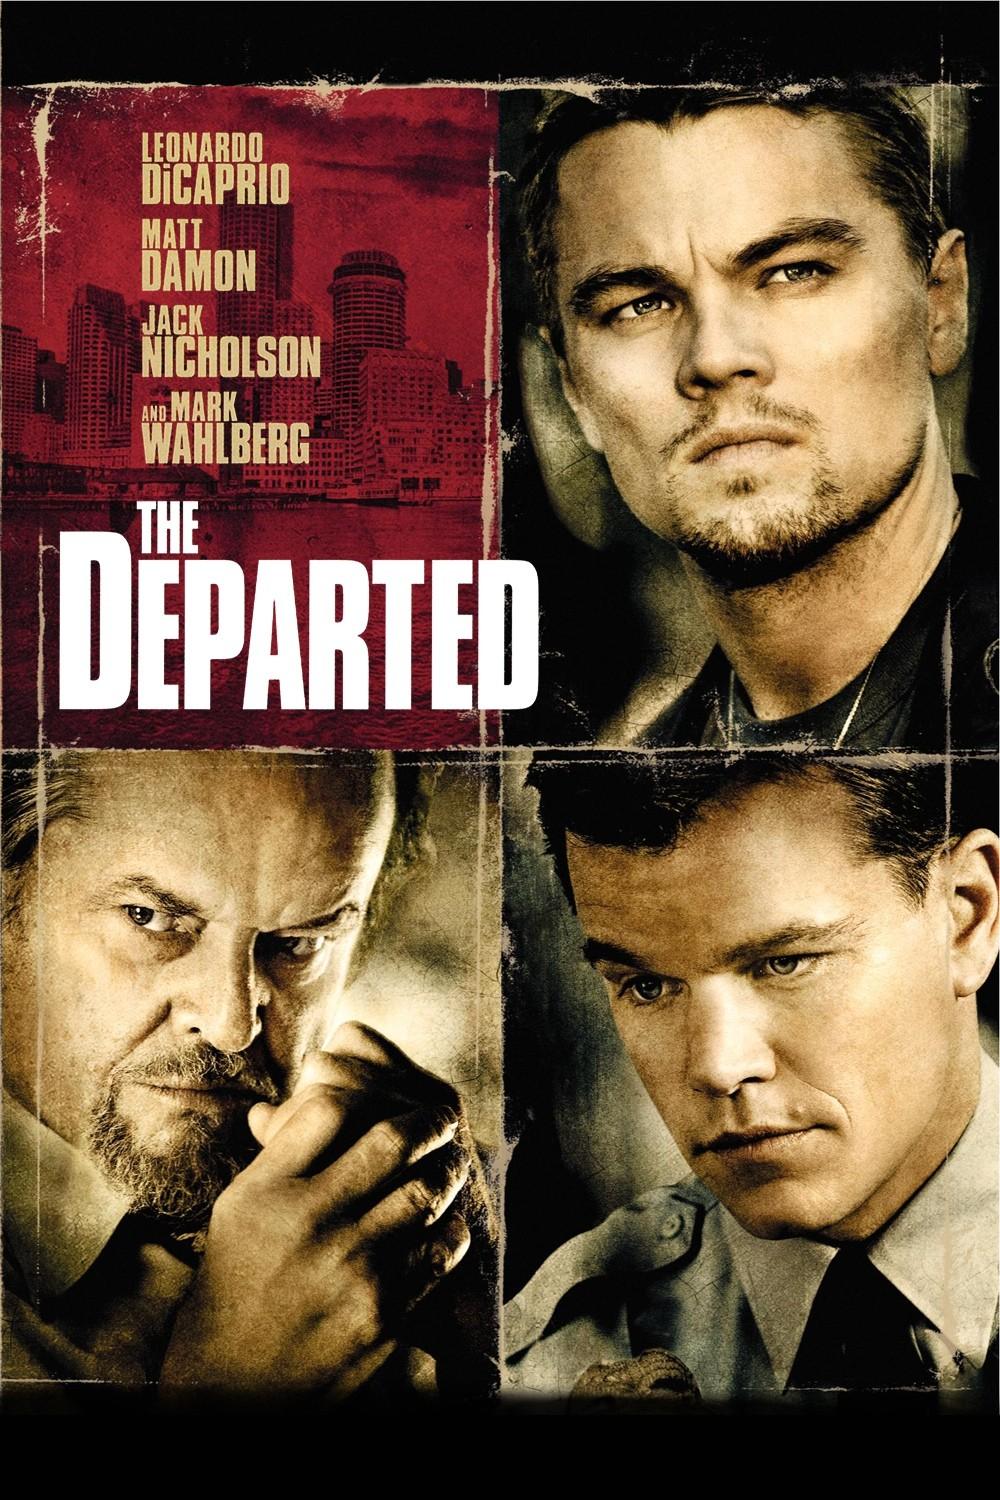 The Departed Backgrounds, Compatible - PC, Mobile, Gadgets| 1000x1500 px